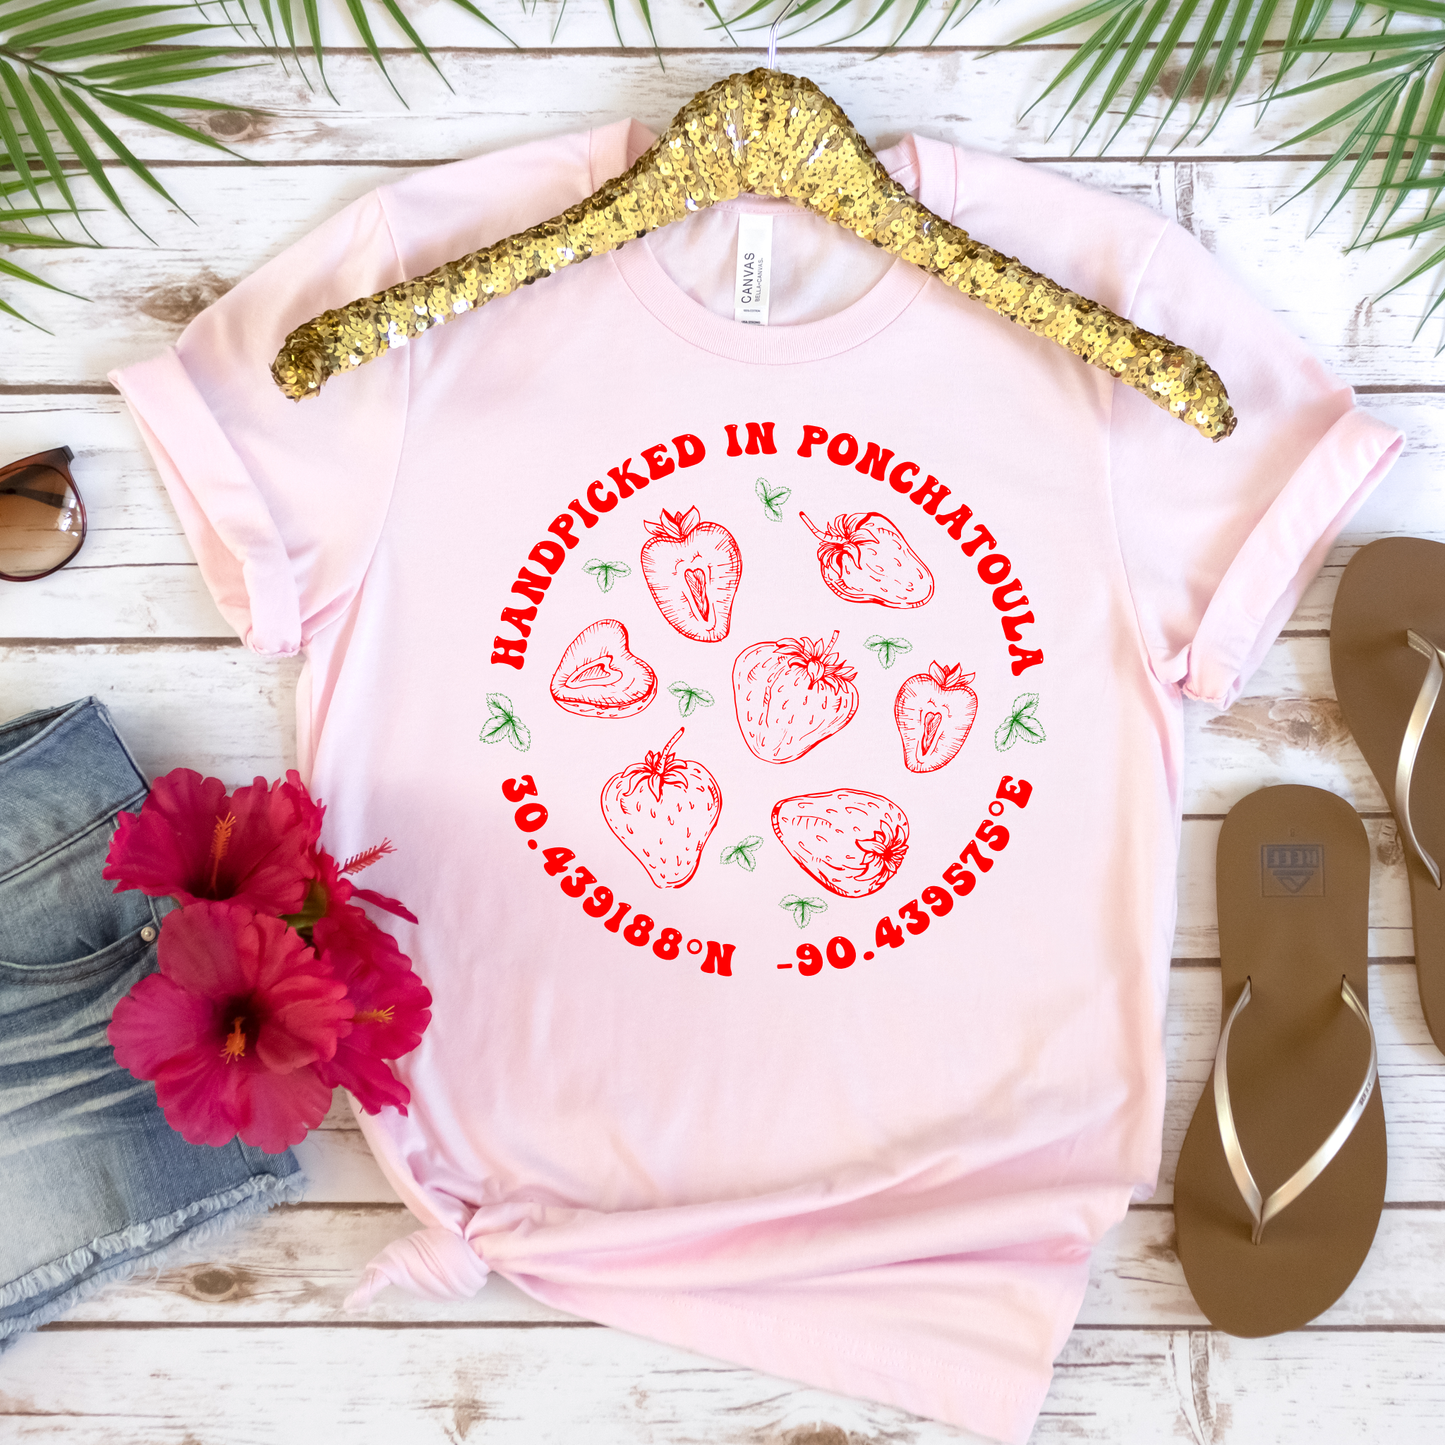 Handpicked in Ponchatoula - Strawberry Festival T-shirt